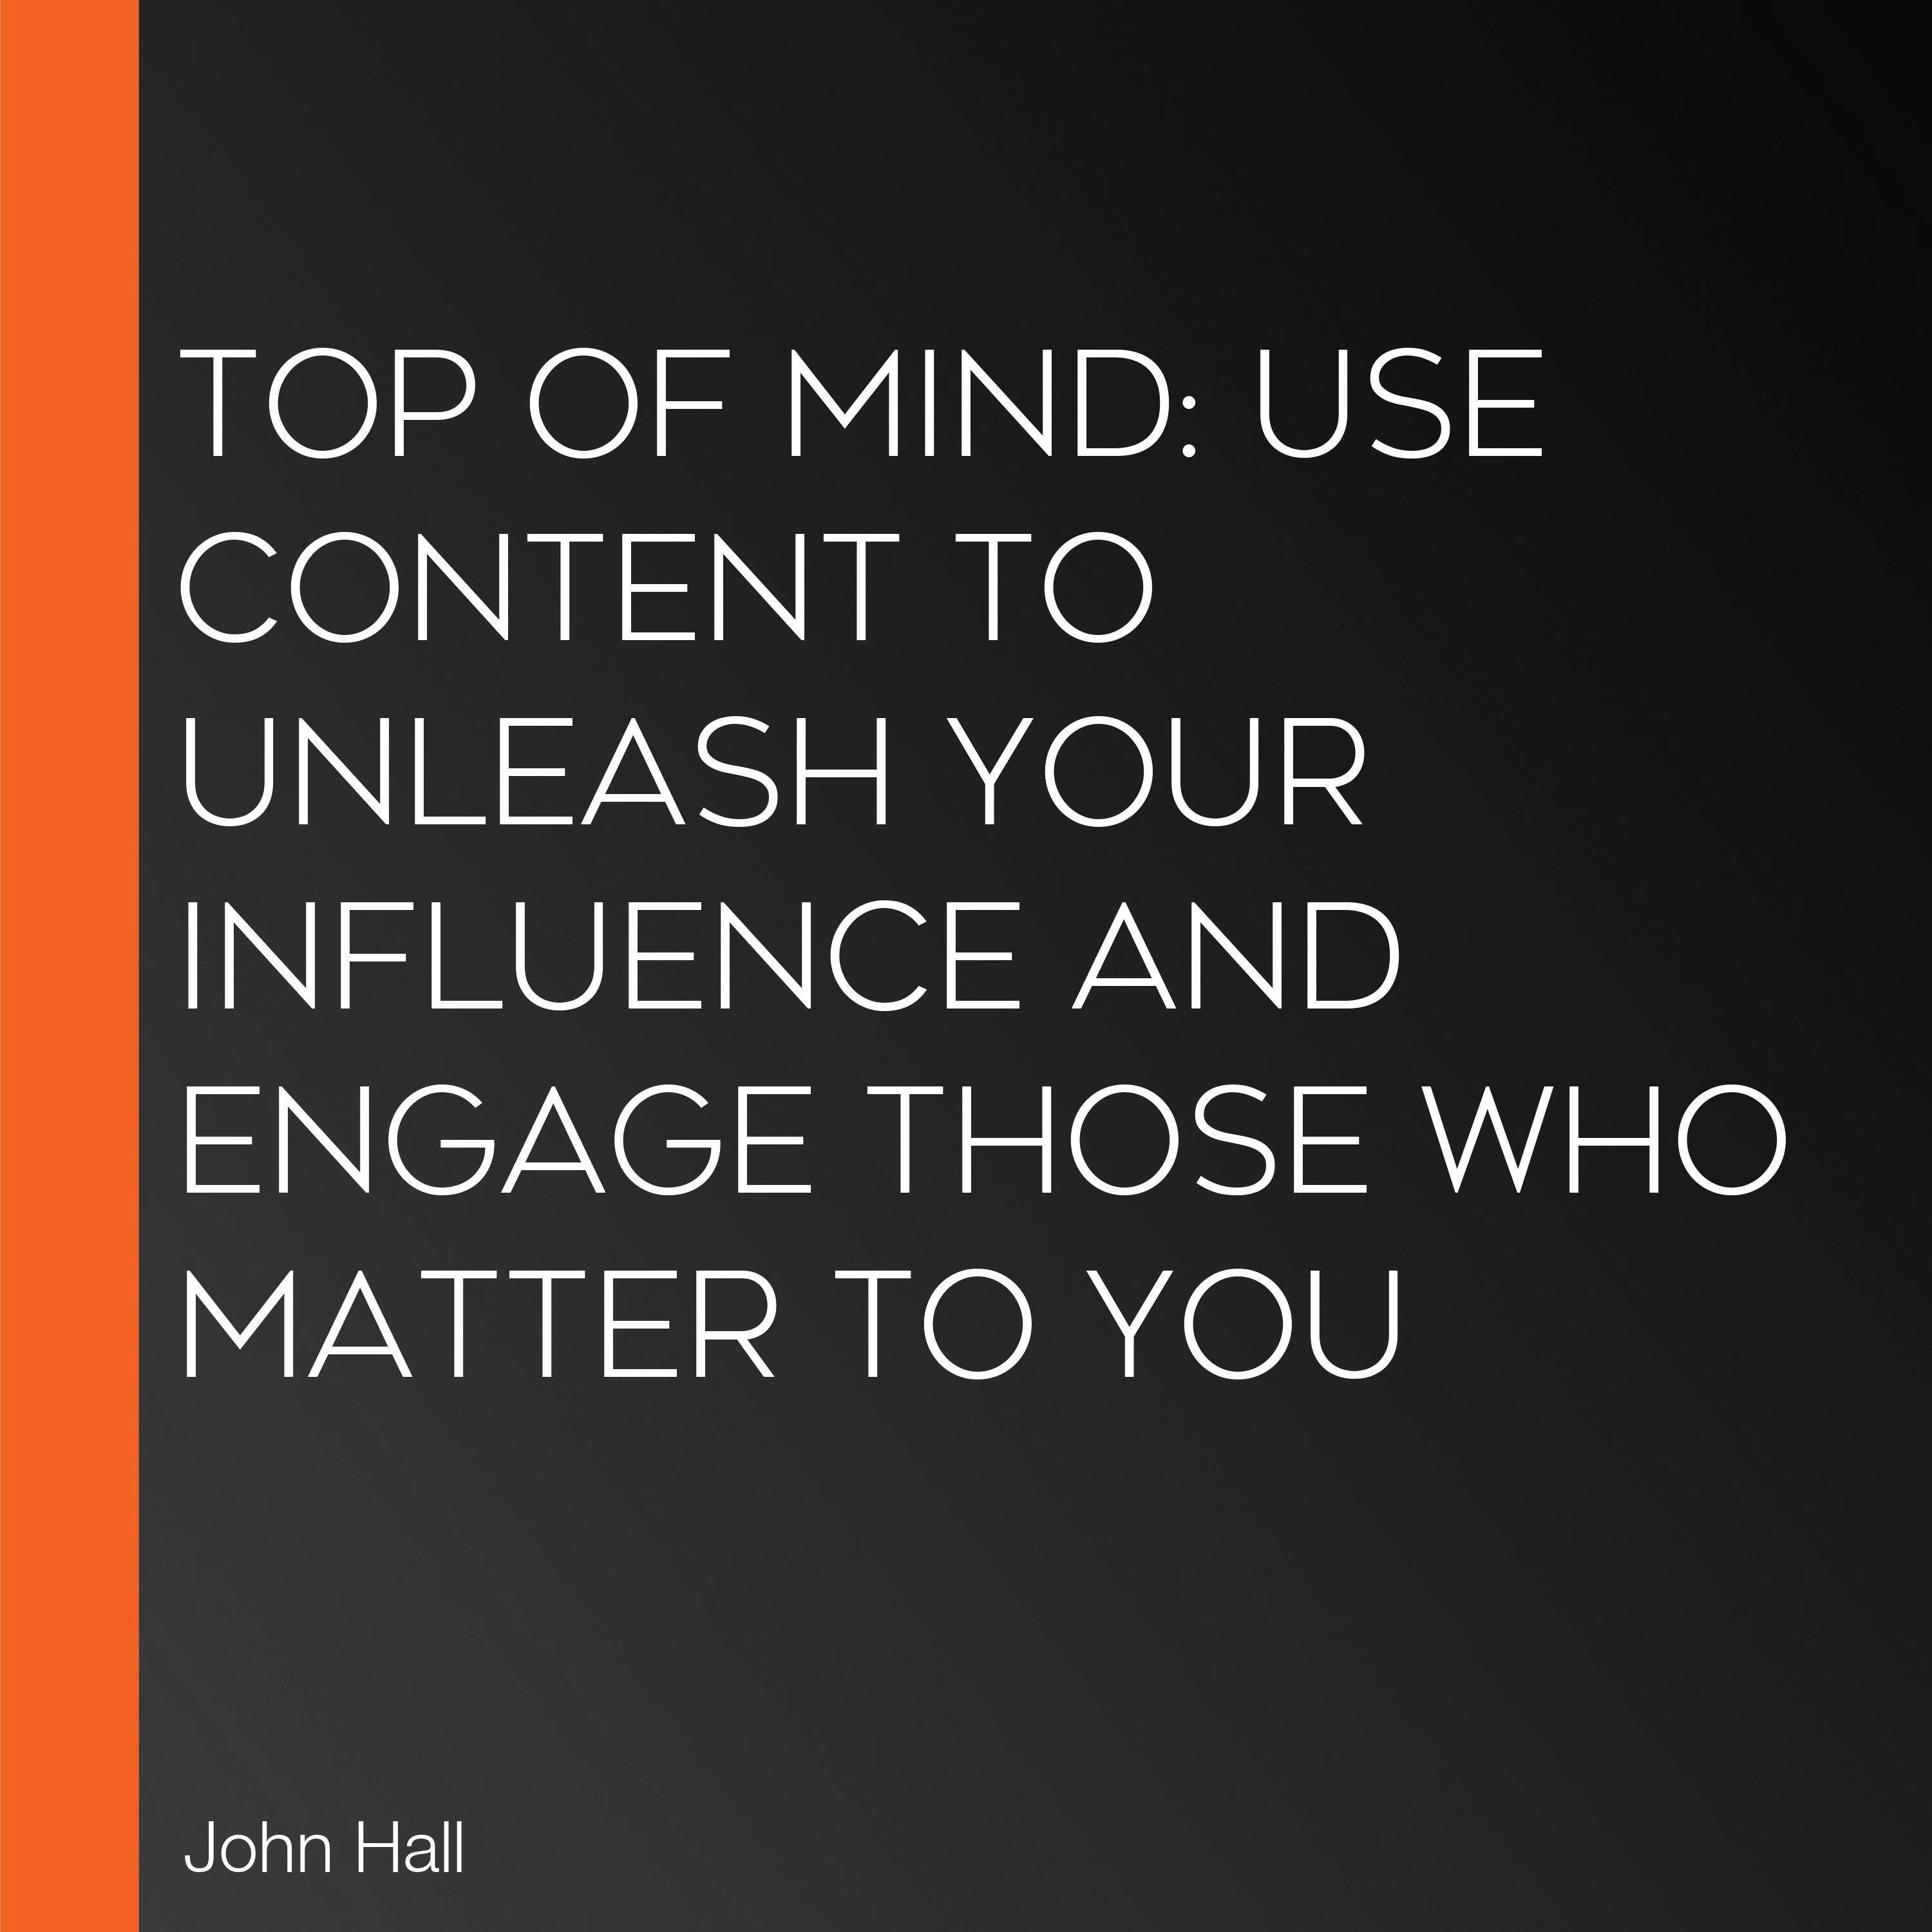 Top of Mind: Use Content to Unleash Your Influence and Engage Those Who Matter To You - undefined